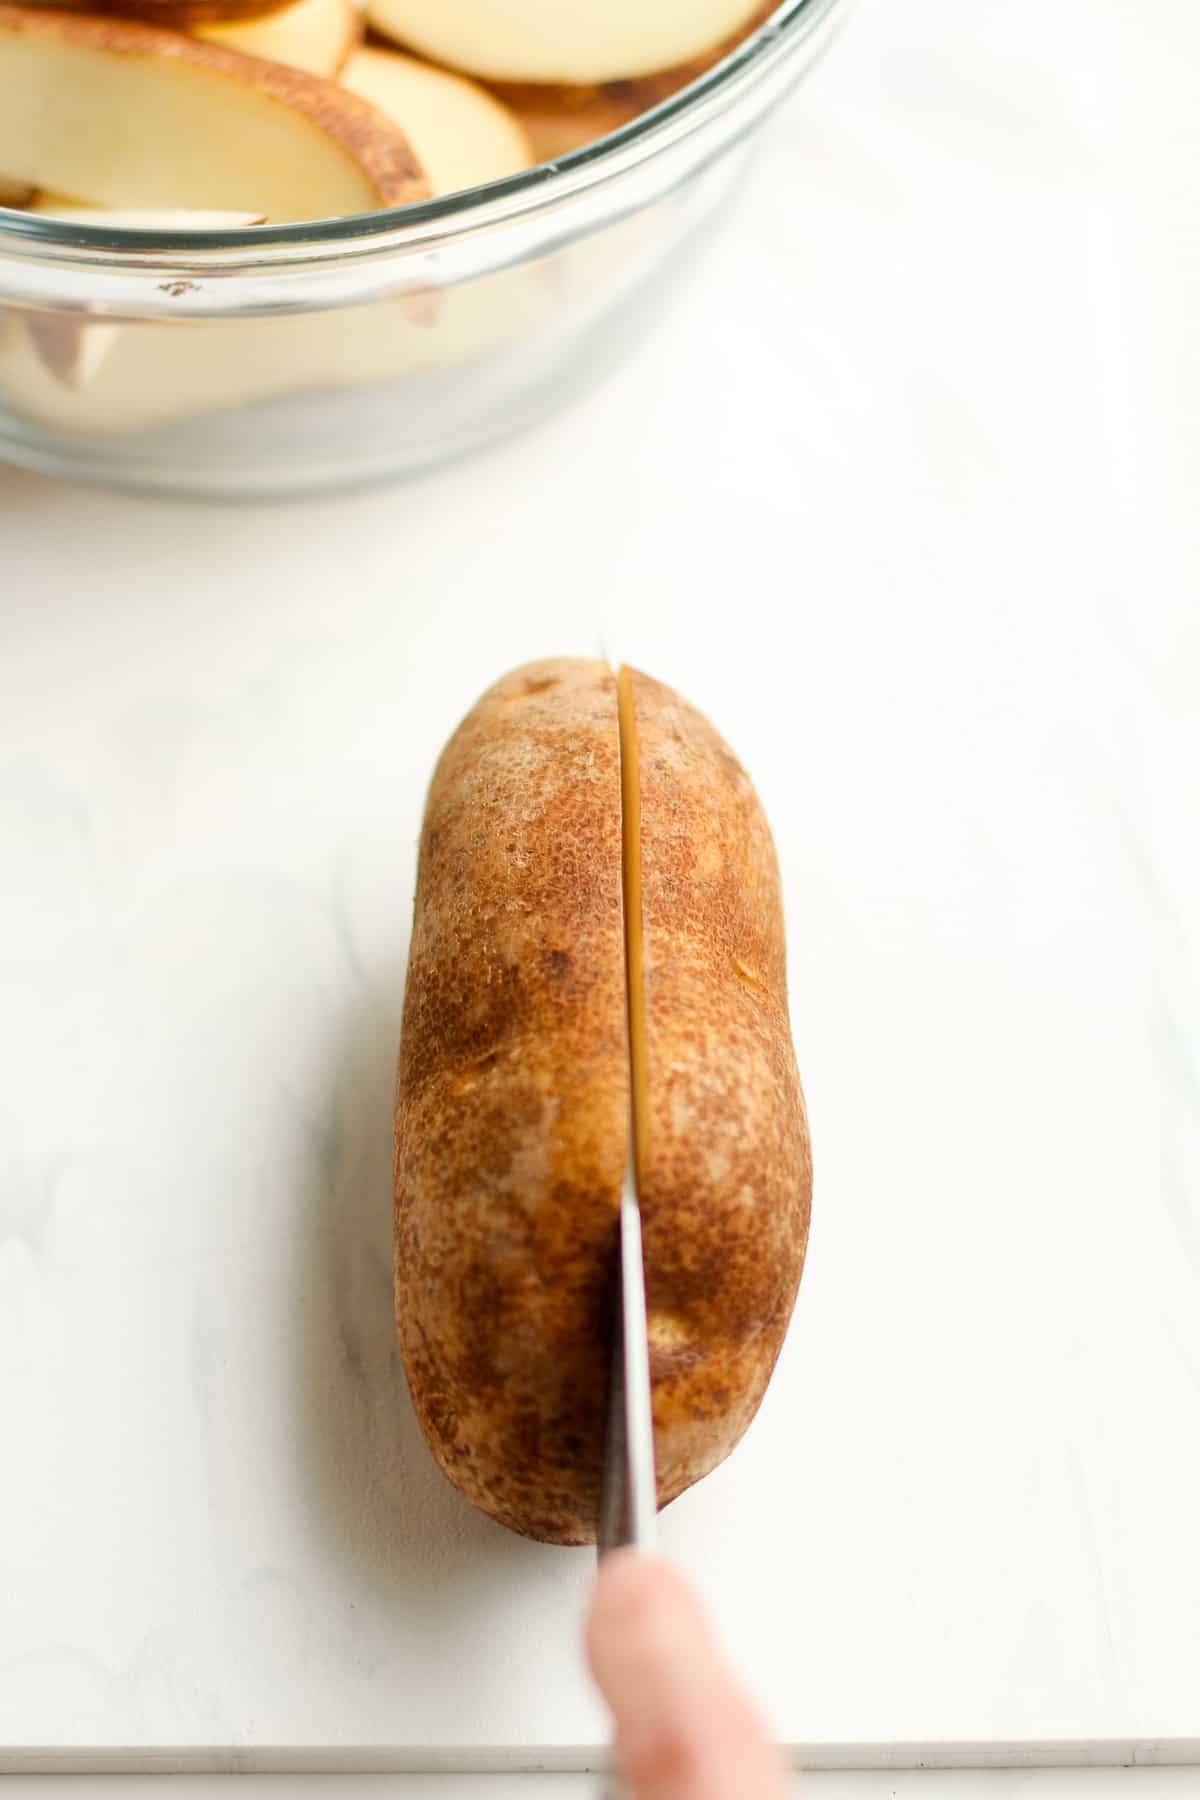 A knife slicing the potato in half.